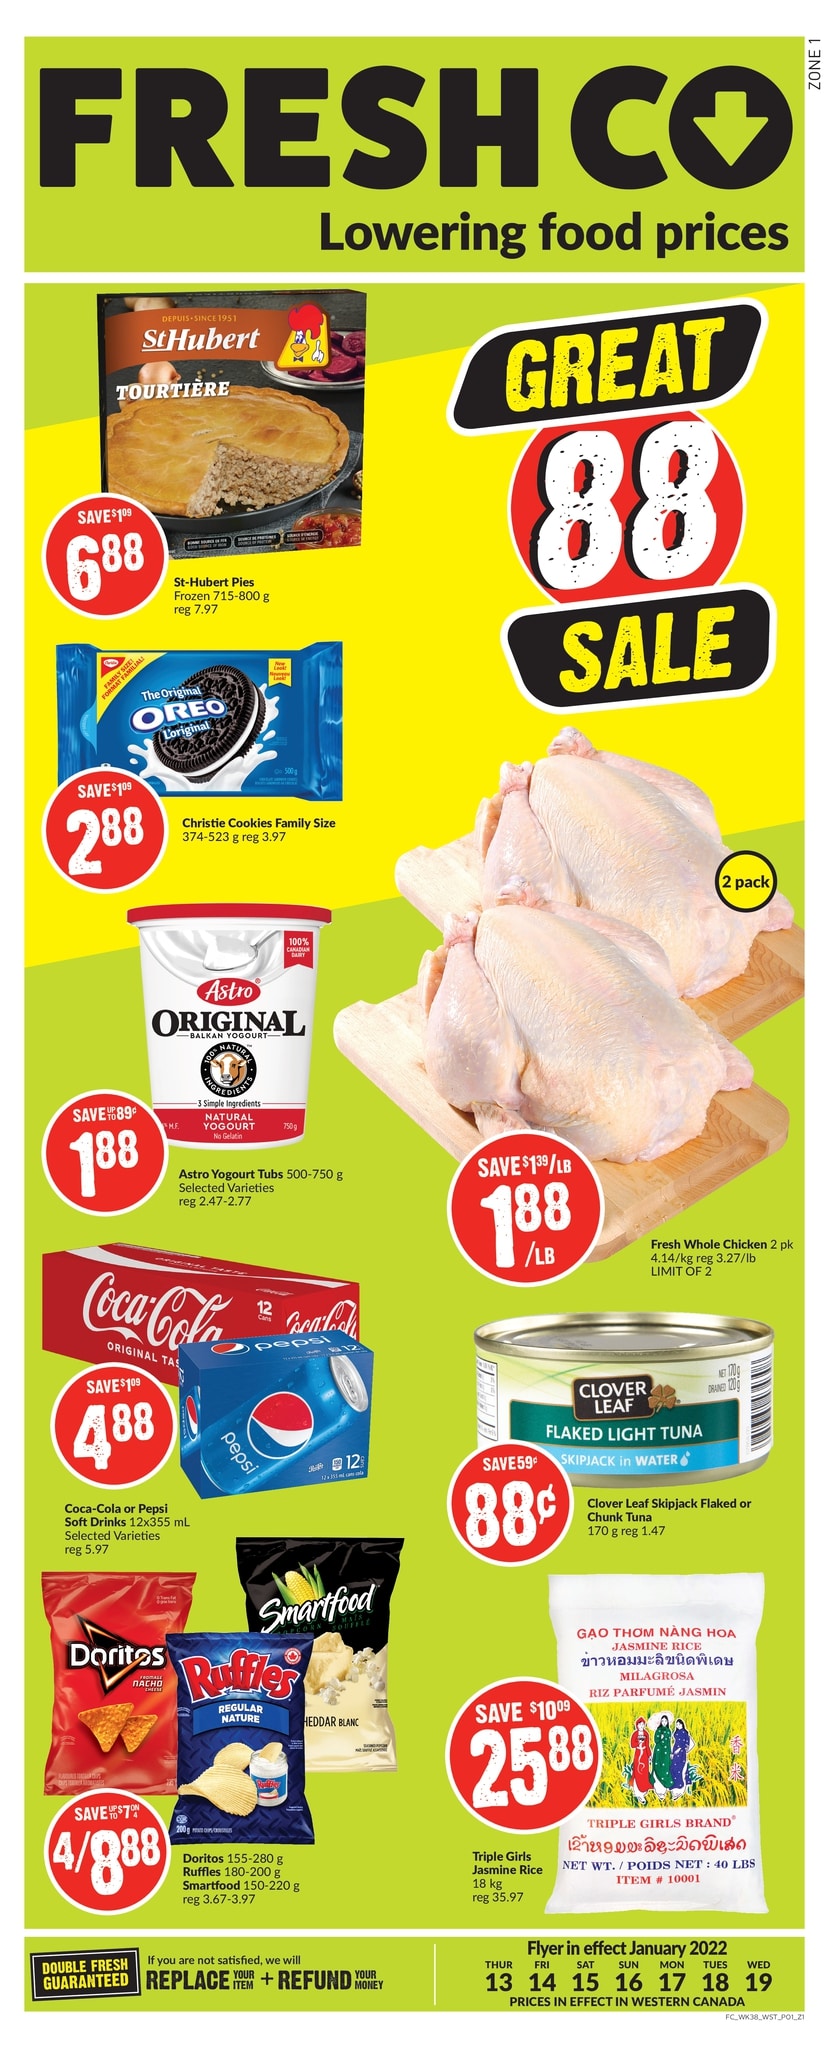 FreshCo British Columbia - Weekly Flyer Specials - Page 2